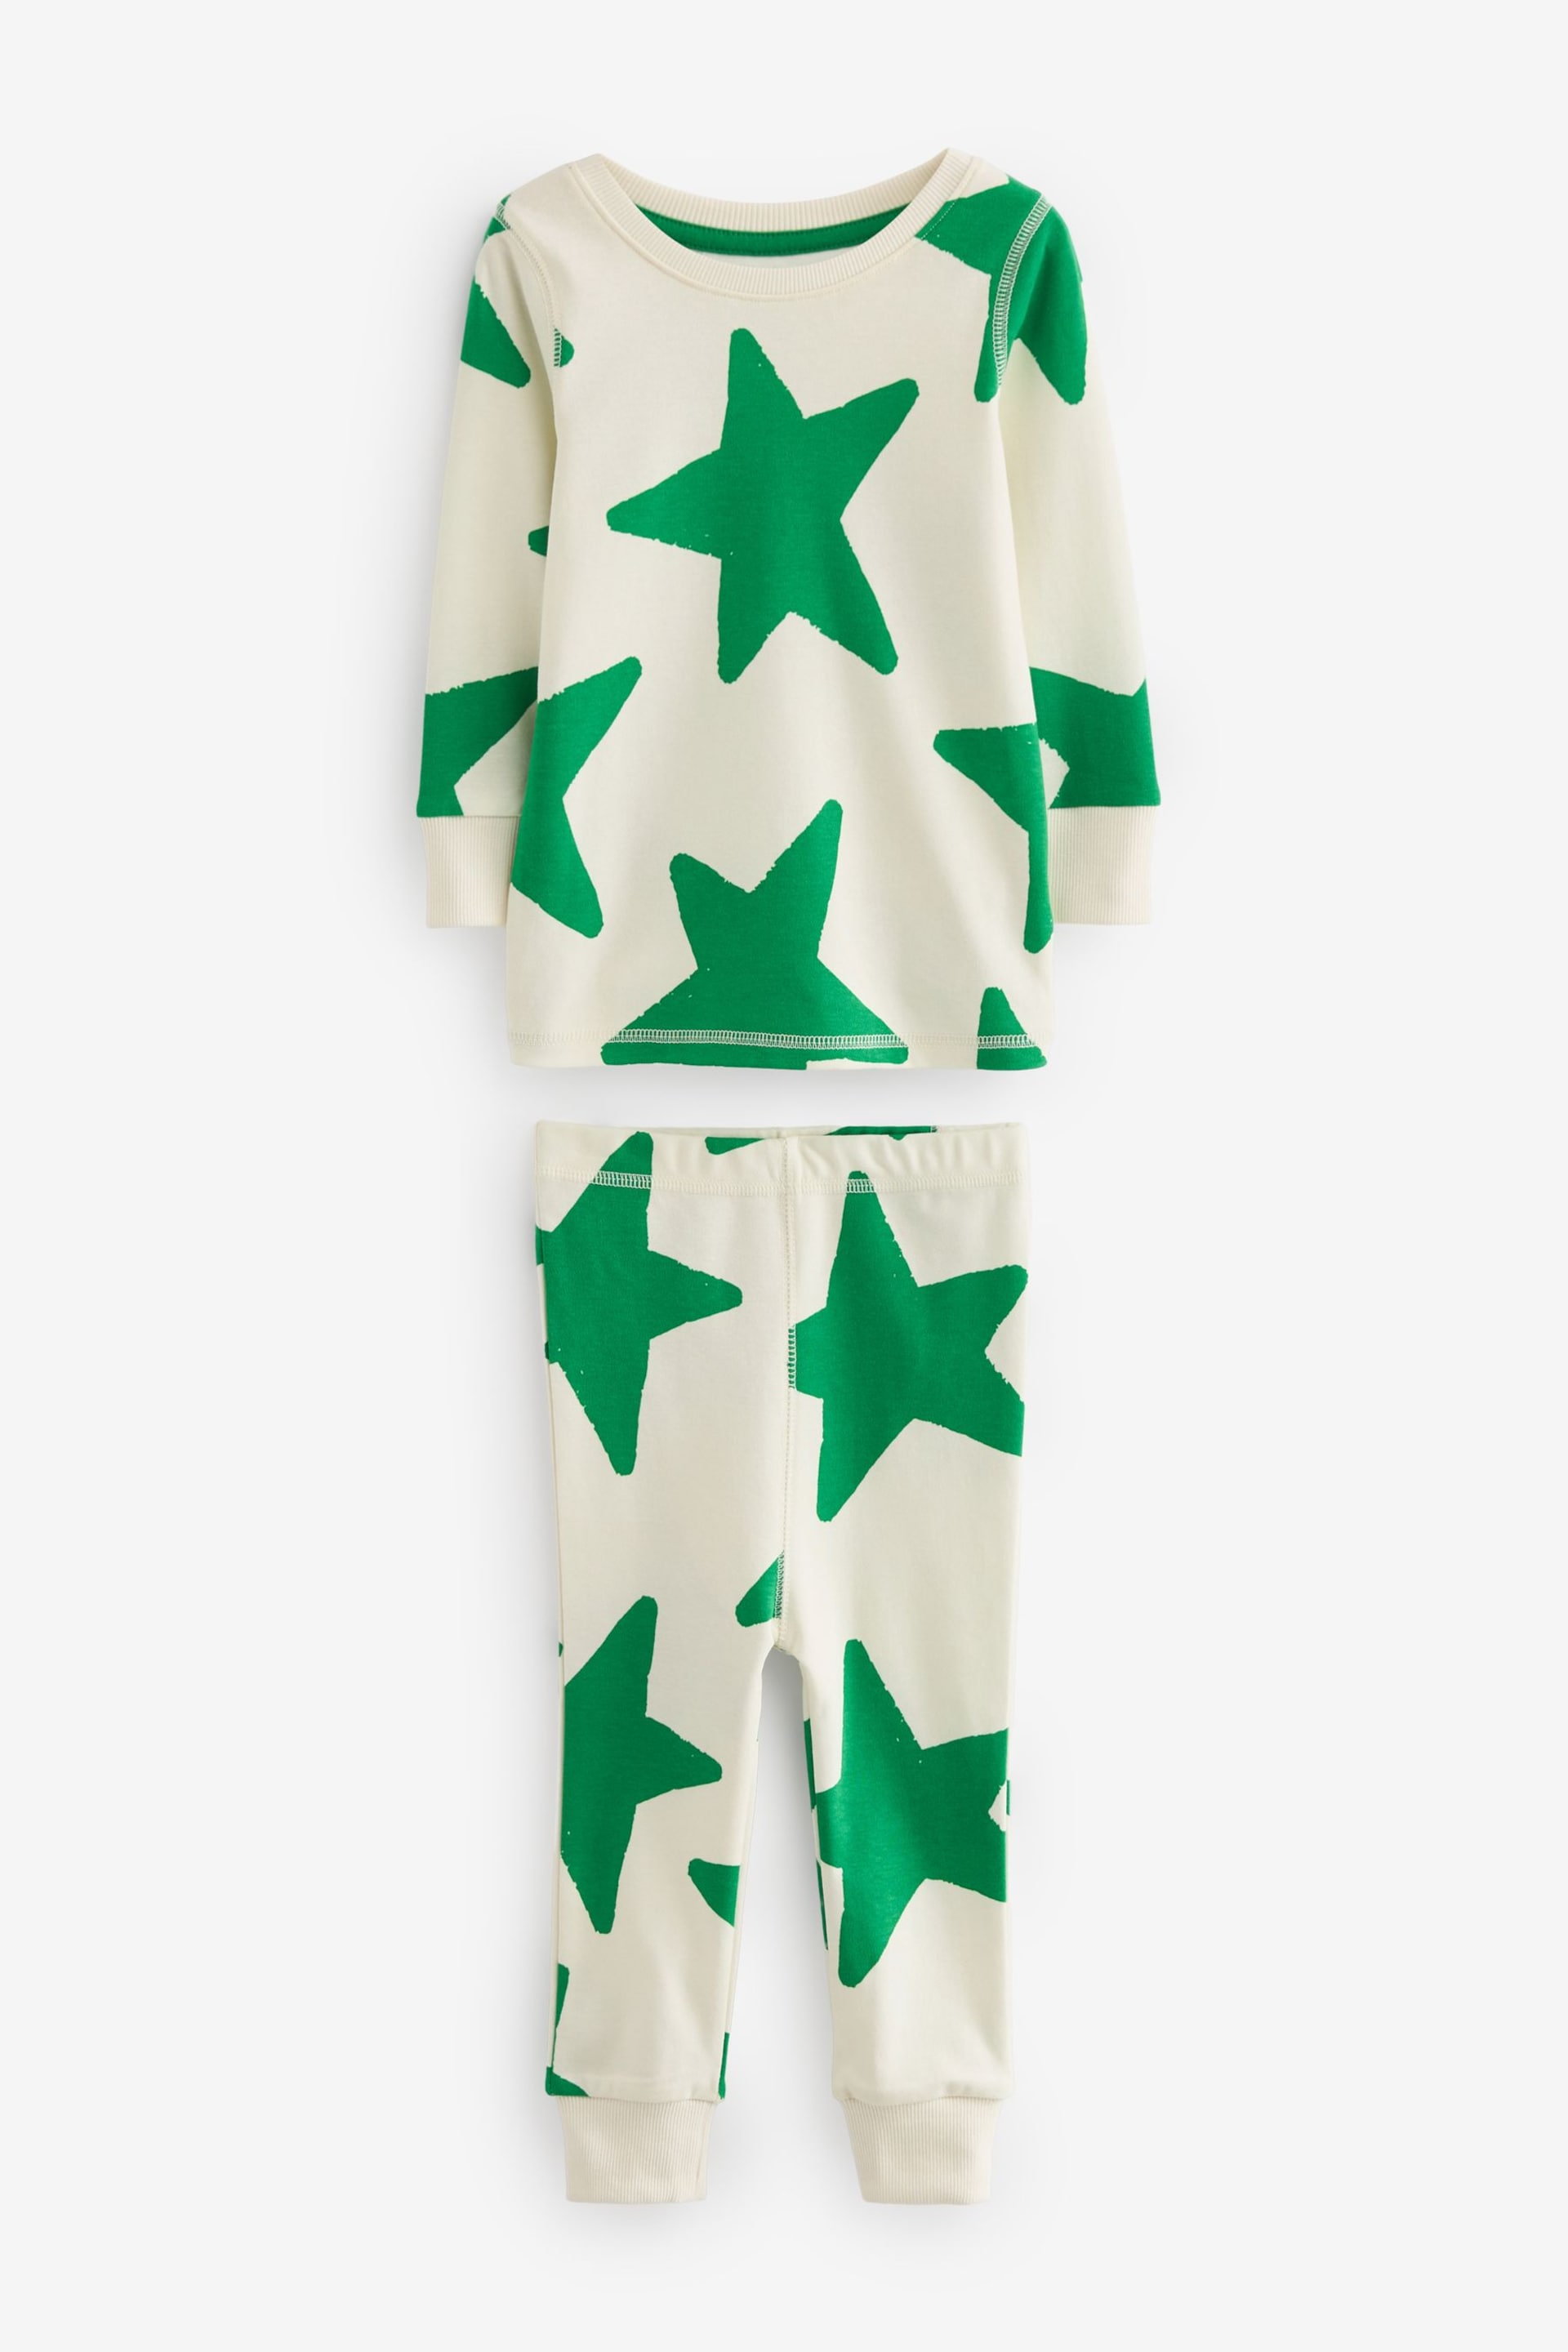 Red/Blue/Green Stars 3 Pack Snuggle Pyjamas (9mths-12yrs) - Image 9 of 17